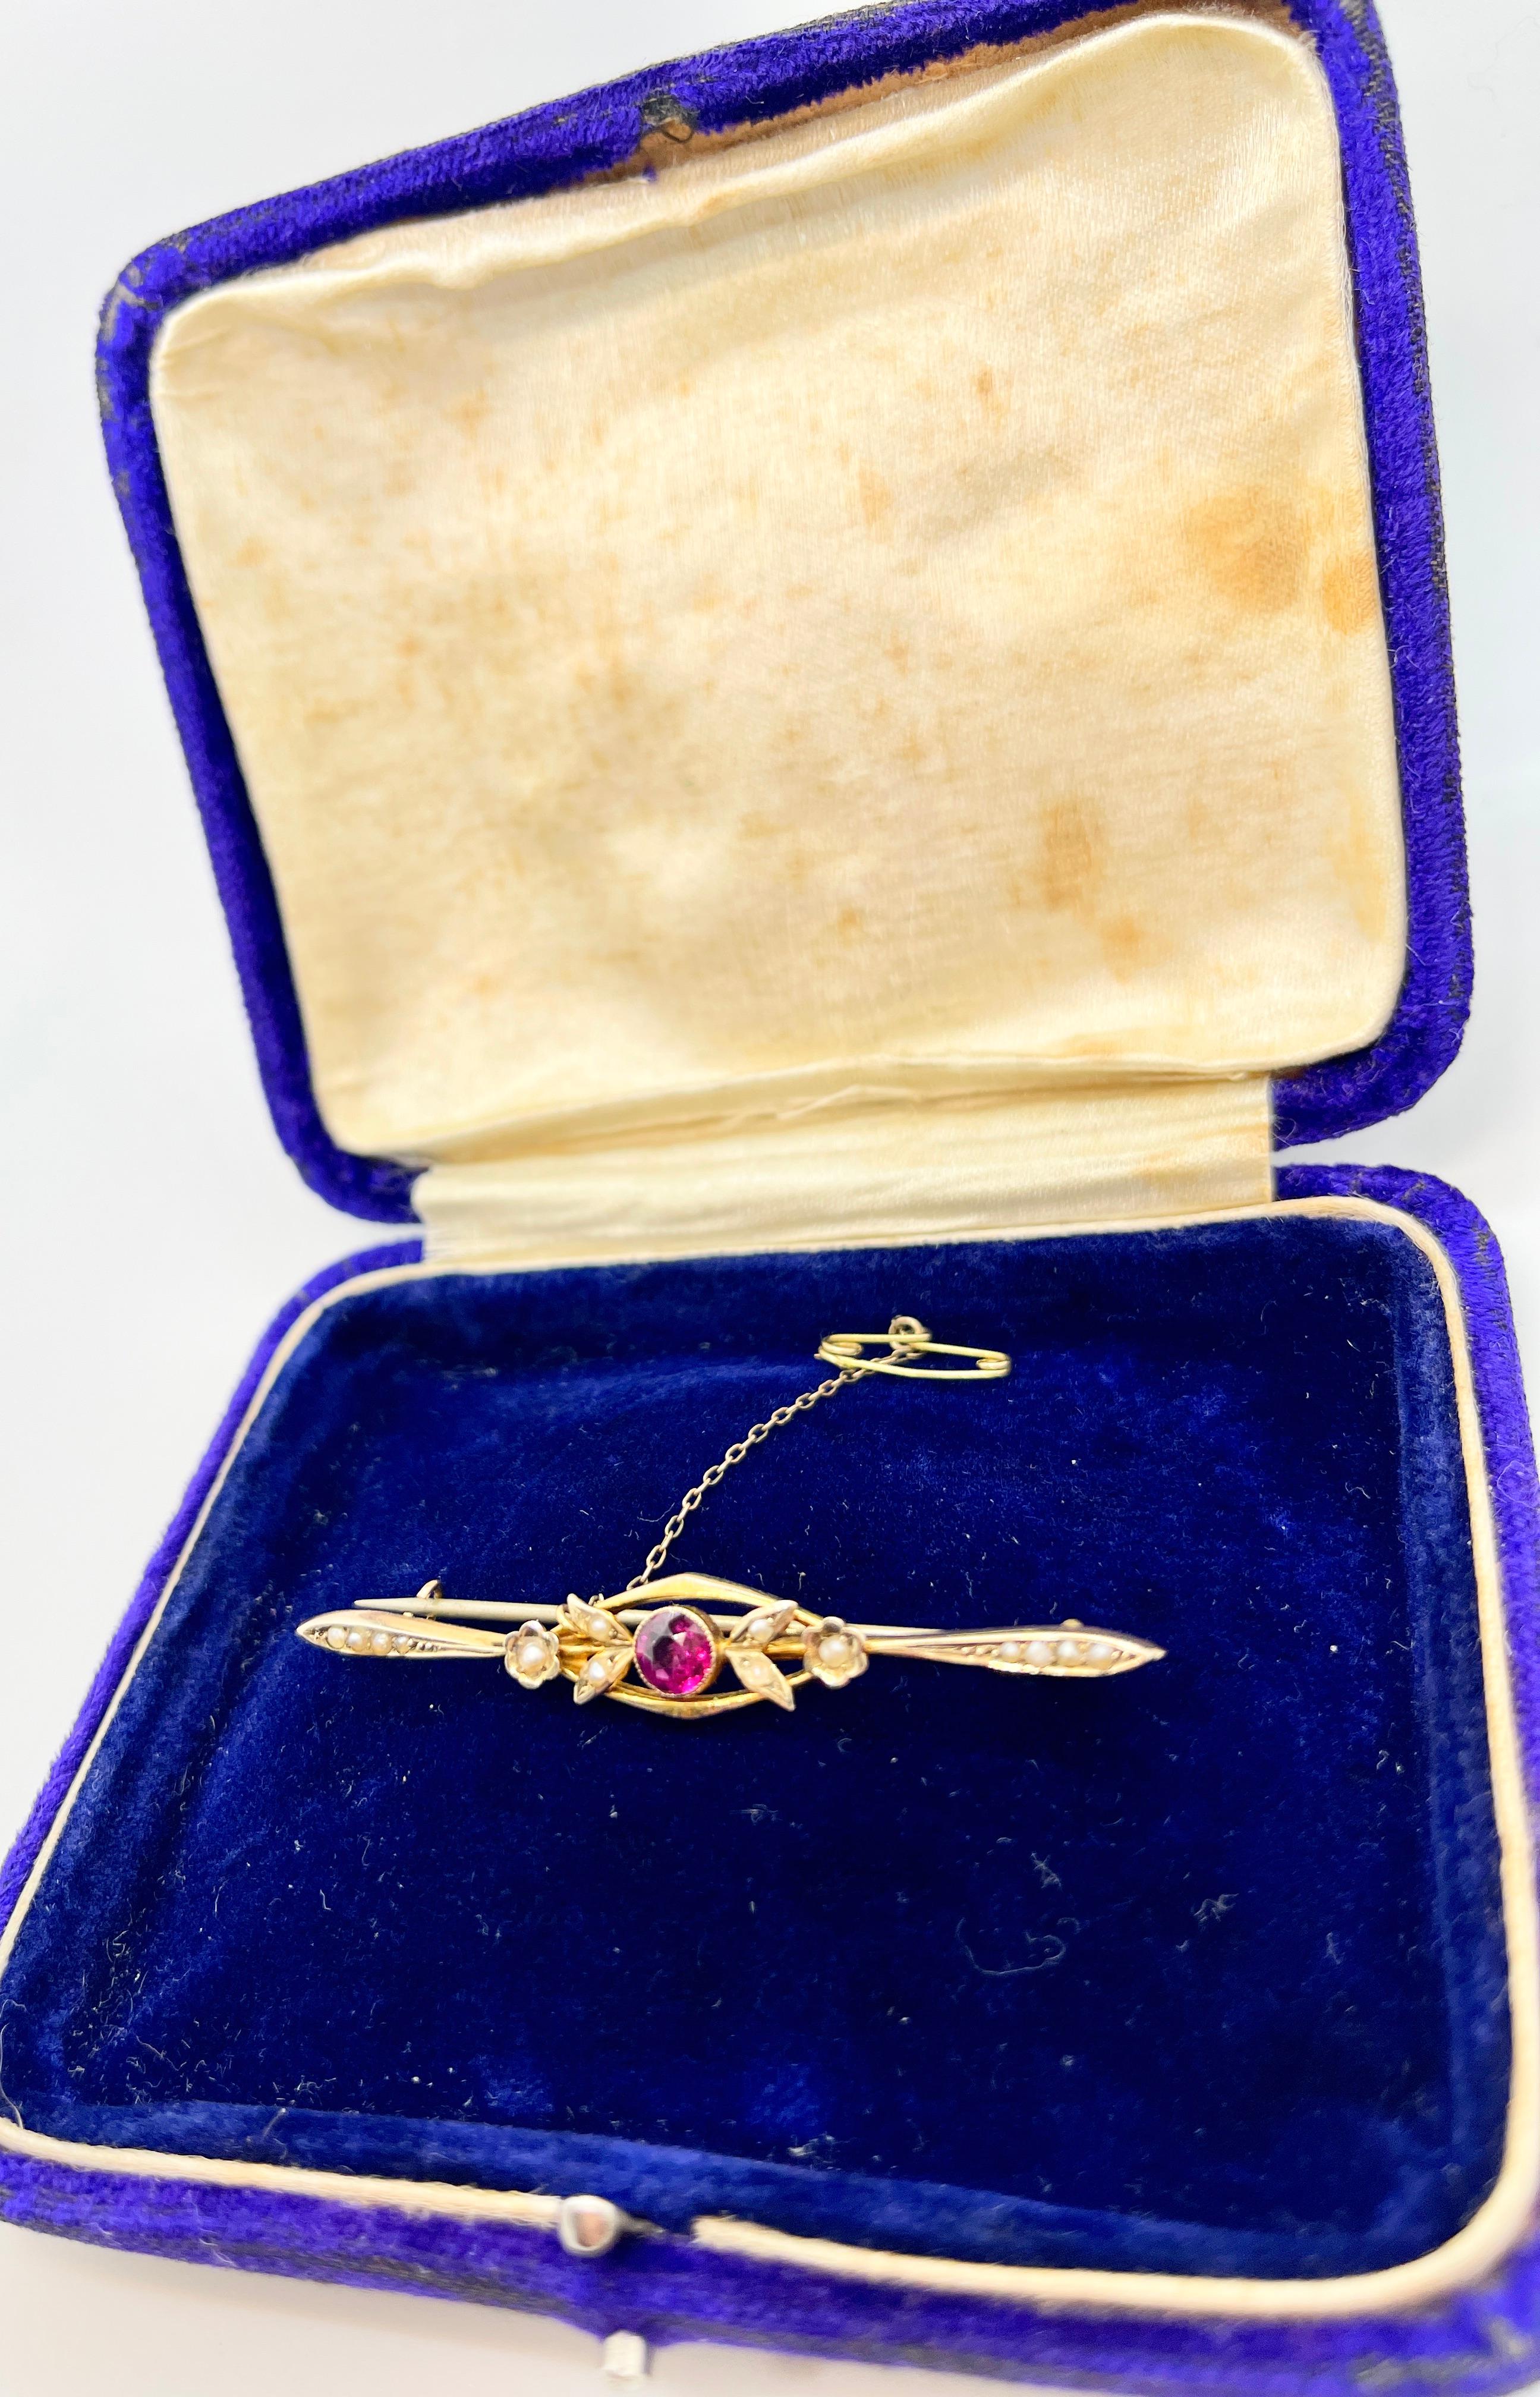 This antique piece features a natural, round Ruby centring 14 seed pearls of graduating size. The bar style brooch is crafted in 9ct yellow gold (stamped) with floral and leaf motifs that are typical of this era, Circa 1910. 

The brooch bears the